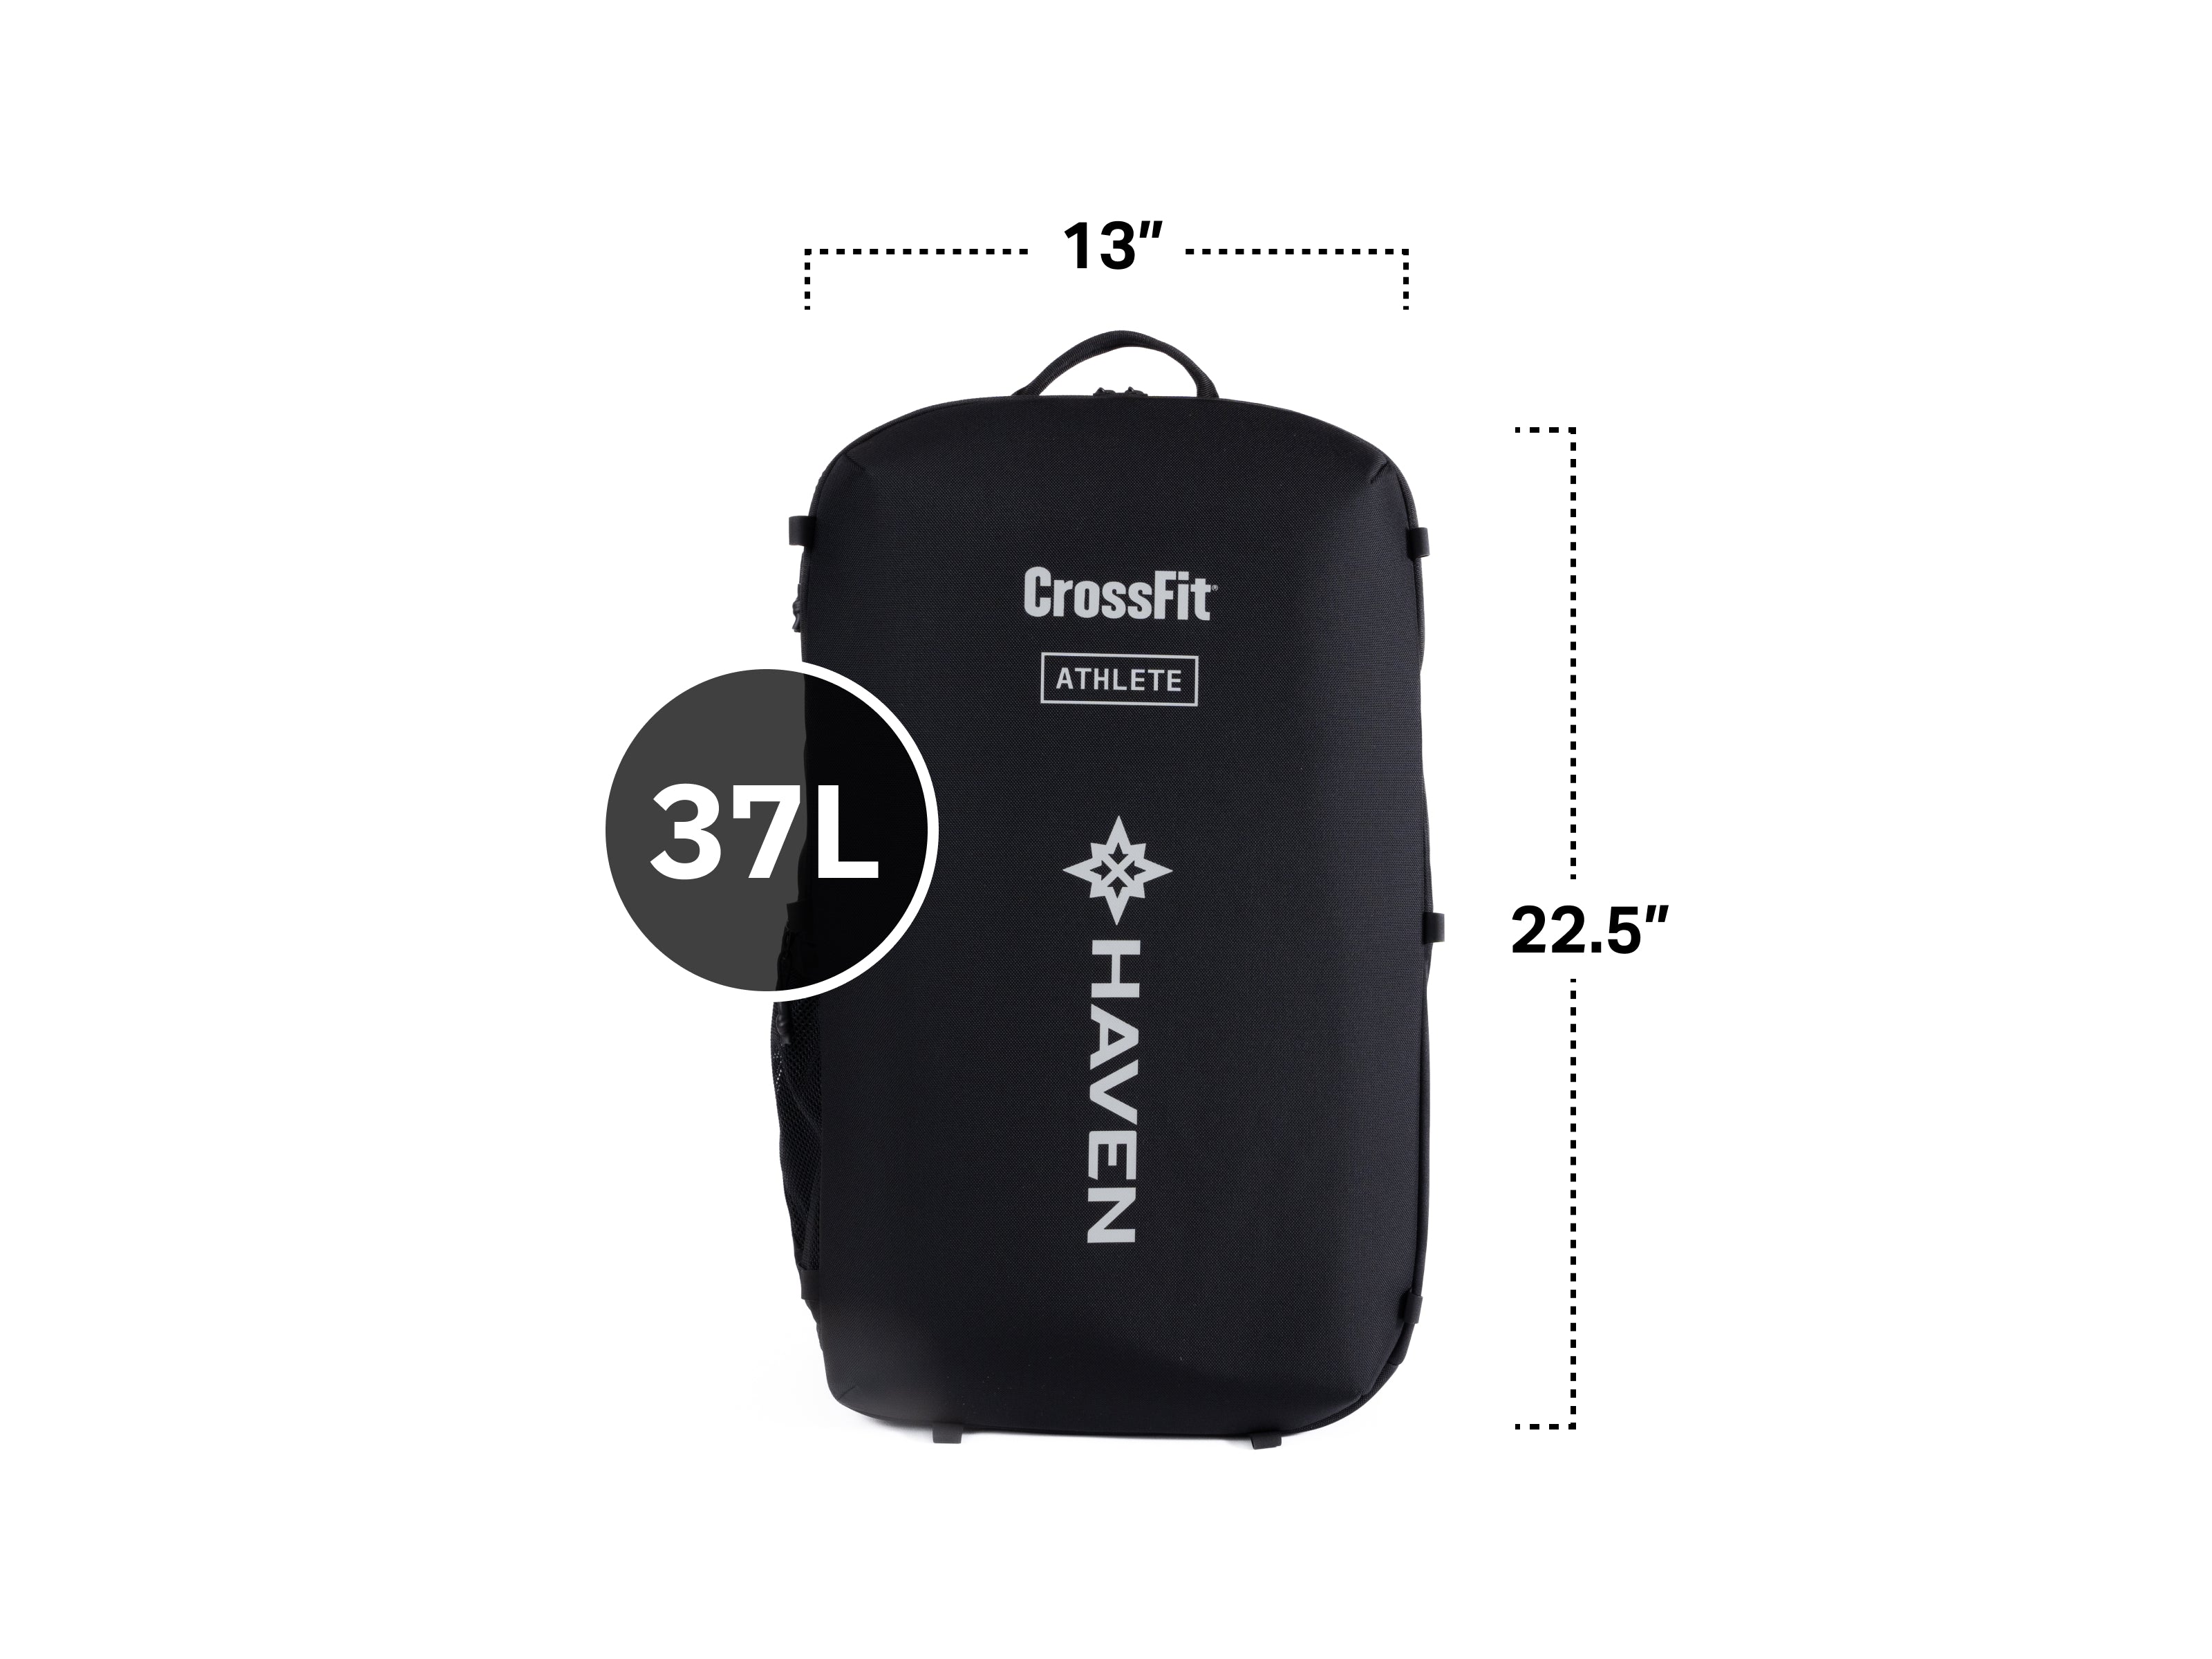 Haven x Crossfit | The Small Backpack - Organized Gym Bag with Vented Shoe Garage & Compartments | for Athletes, Weightlifters, & Professionals